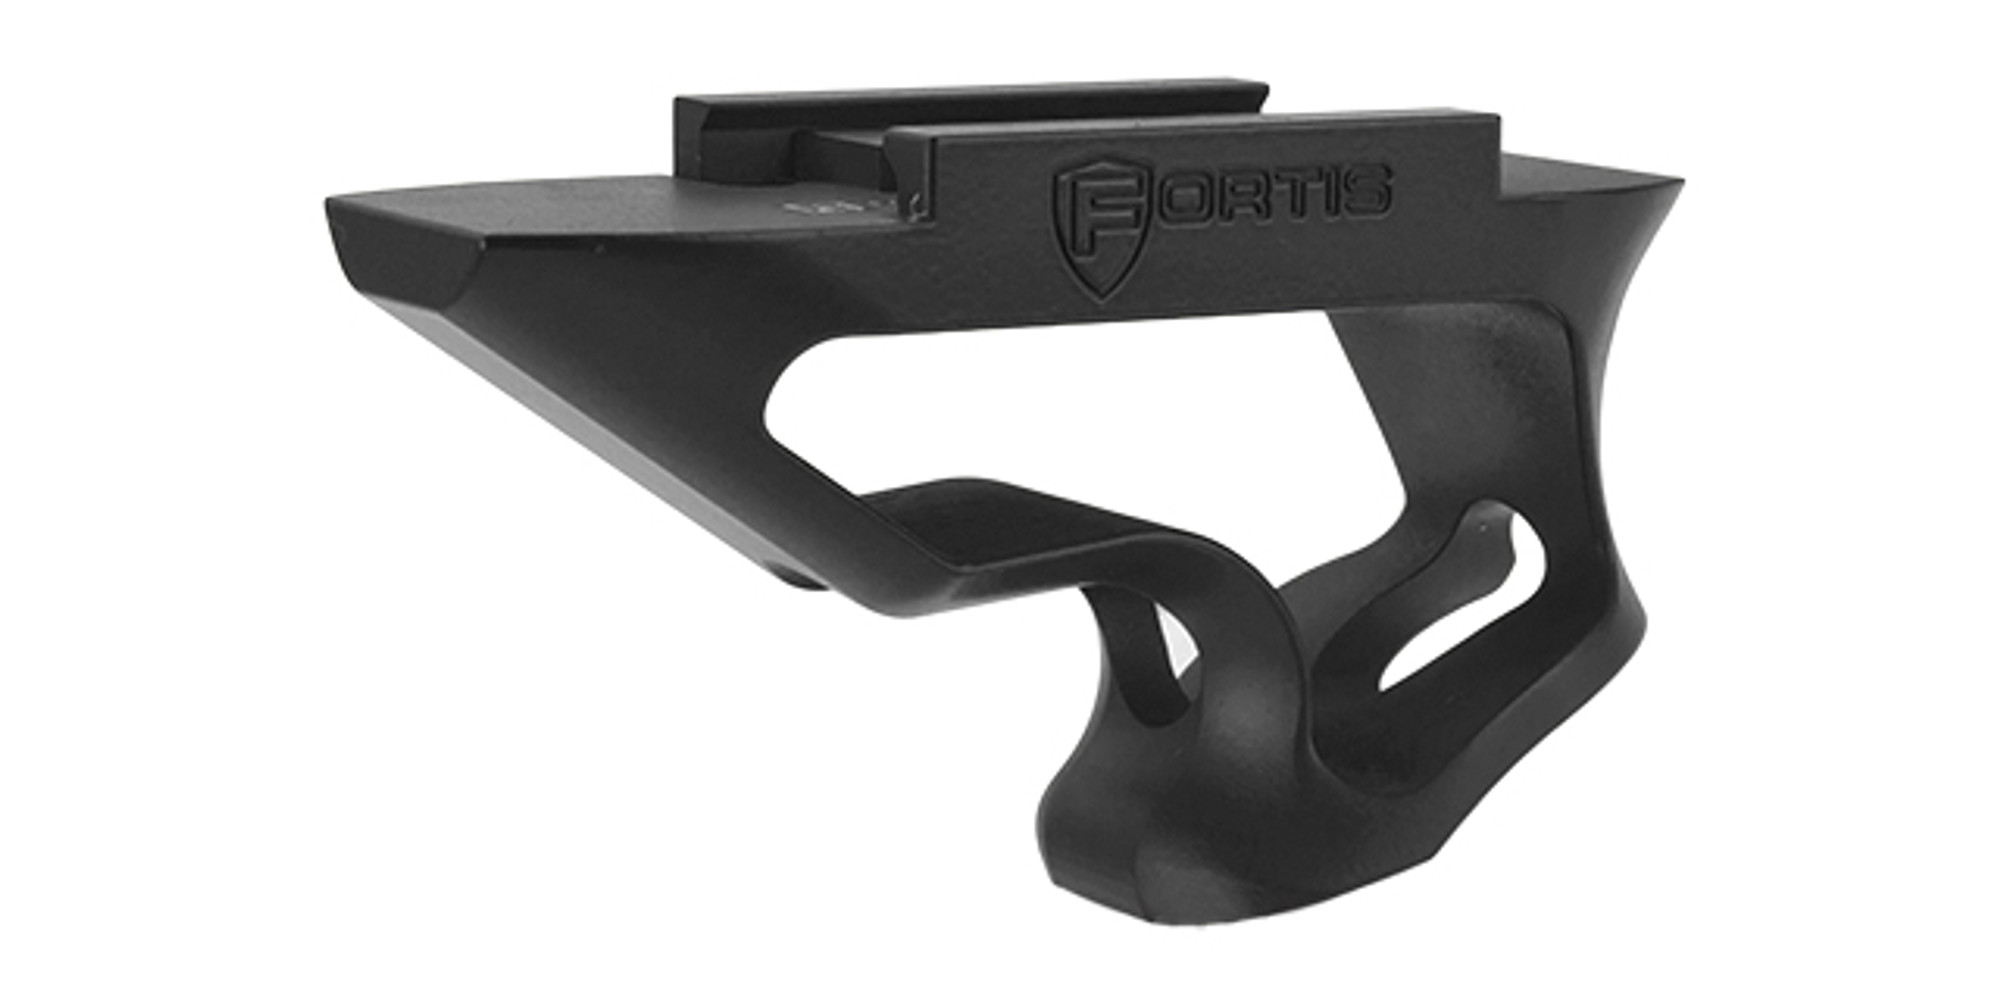 PTS® Fortis Shift™ CNC Machined Billet Aluminum Short Angled Picatinny Mounted Grip - Black